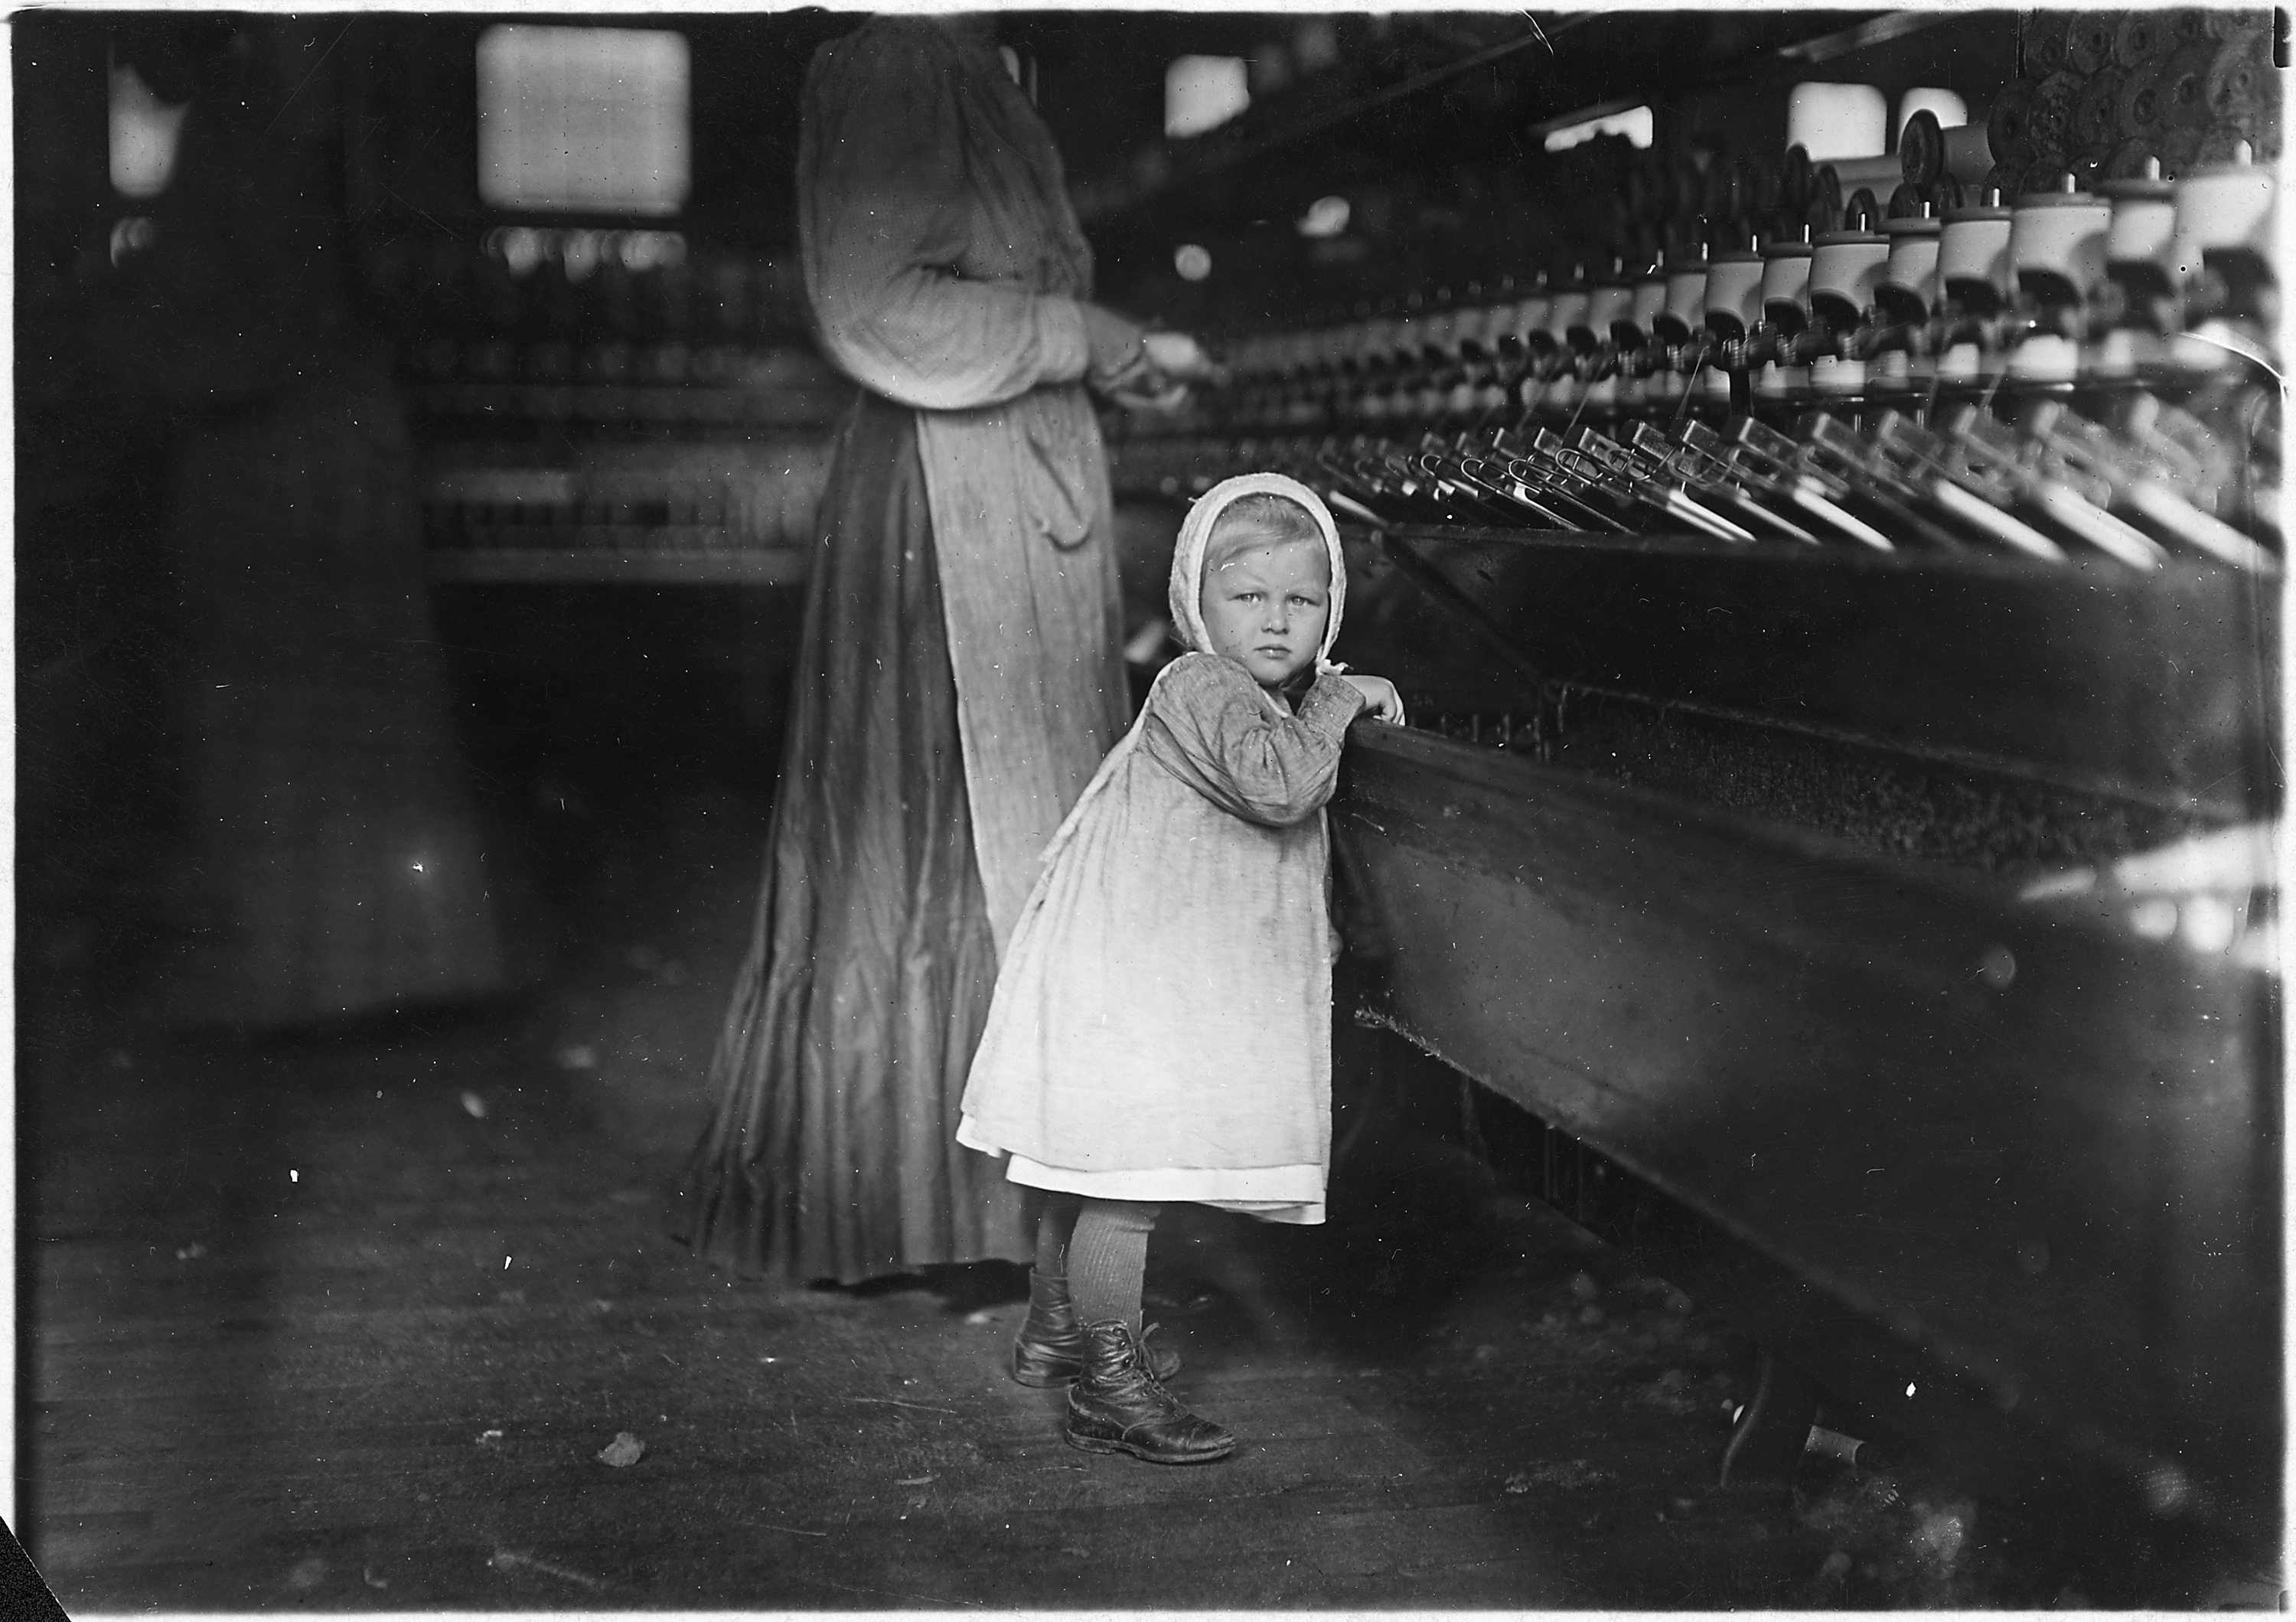 Ivey Mill. Little one, 3 years old, who visits and plays in the mill. Daughter of the overseer. Hickory, N.C. - NARA - 523114